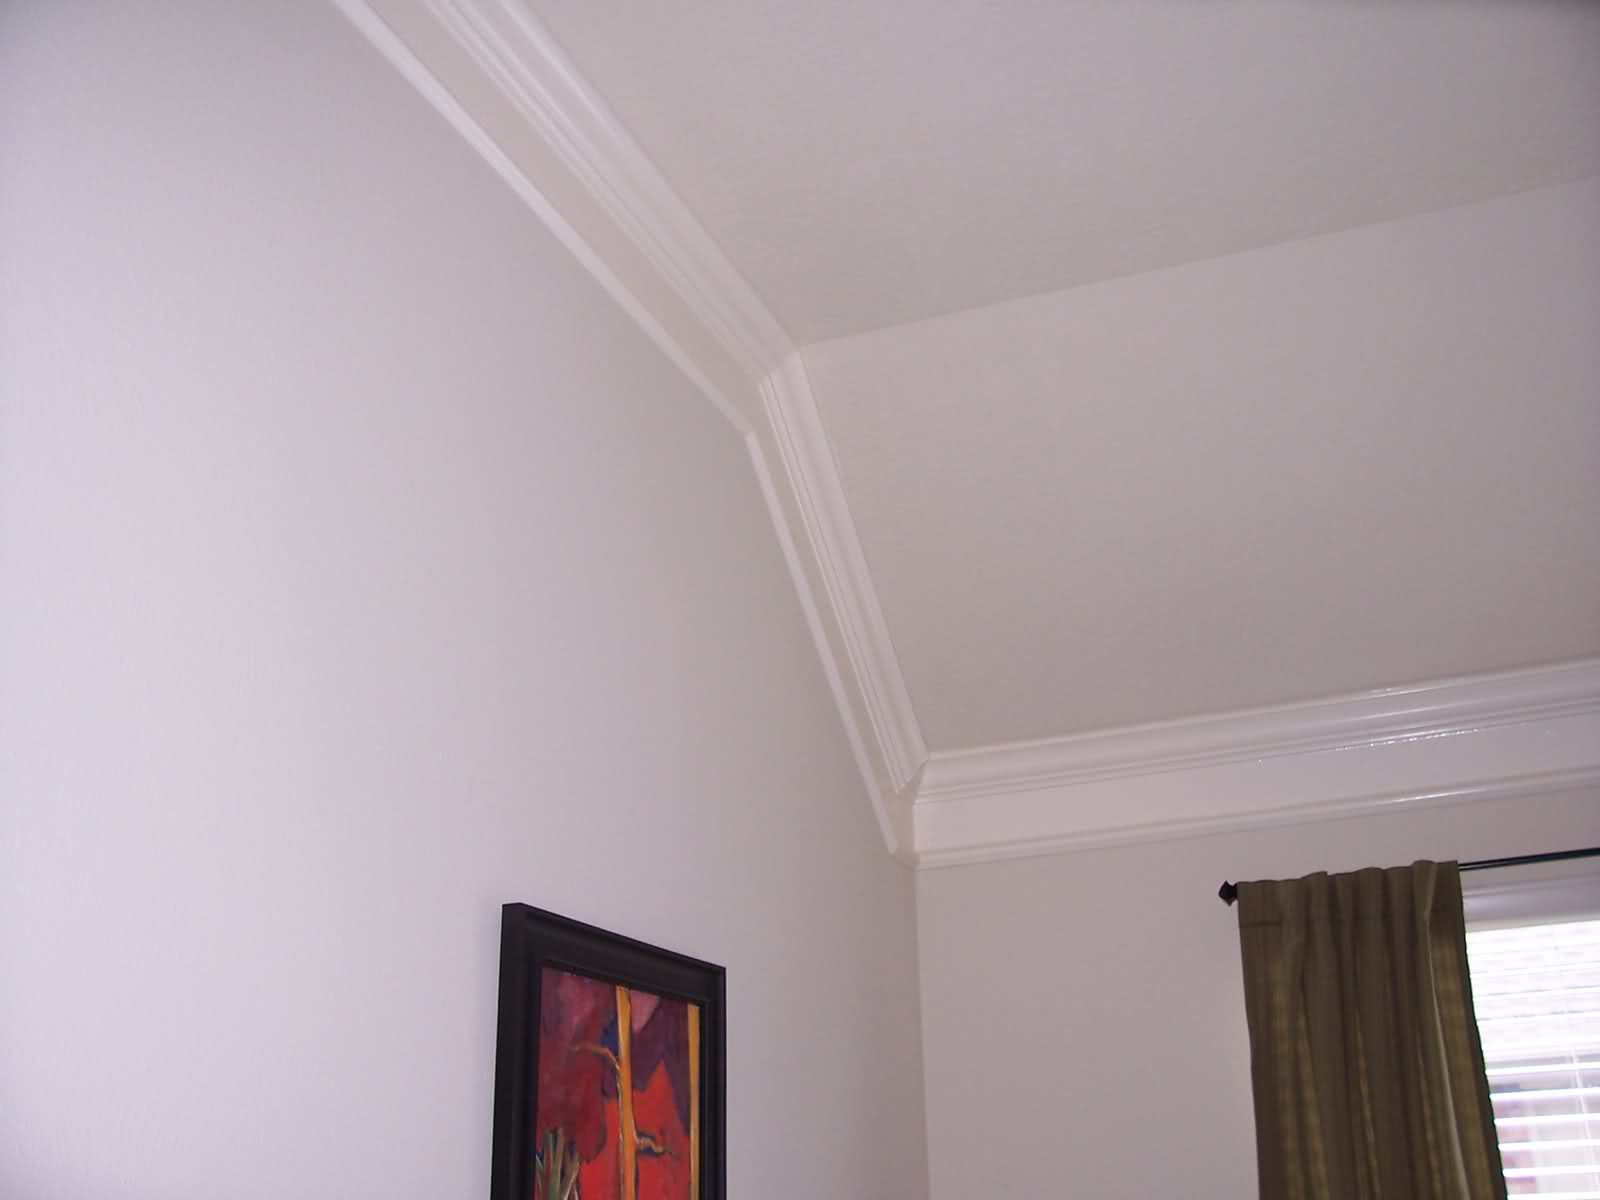 Crown Molding On Angled Ceilings Makely School For Girls Angled Ceilings Crown Molding Vaulted Ceiling Ceiling Crown Molding